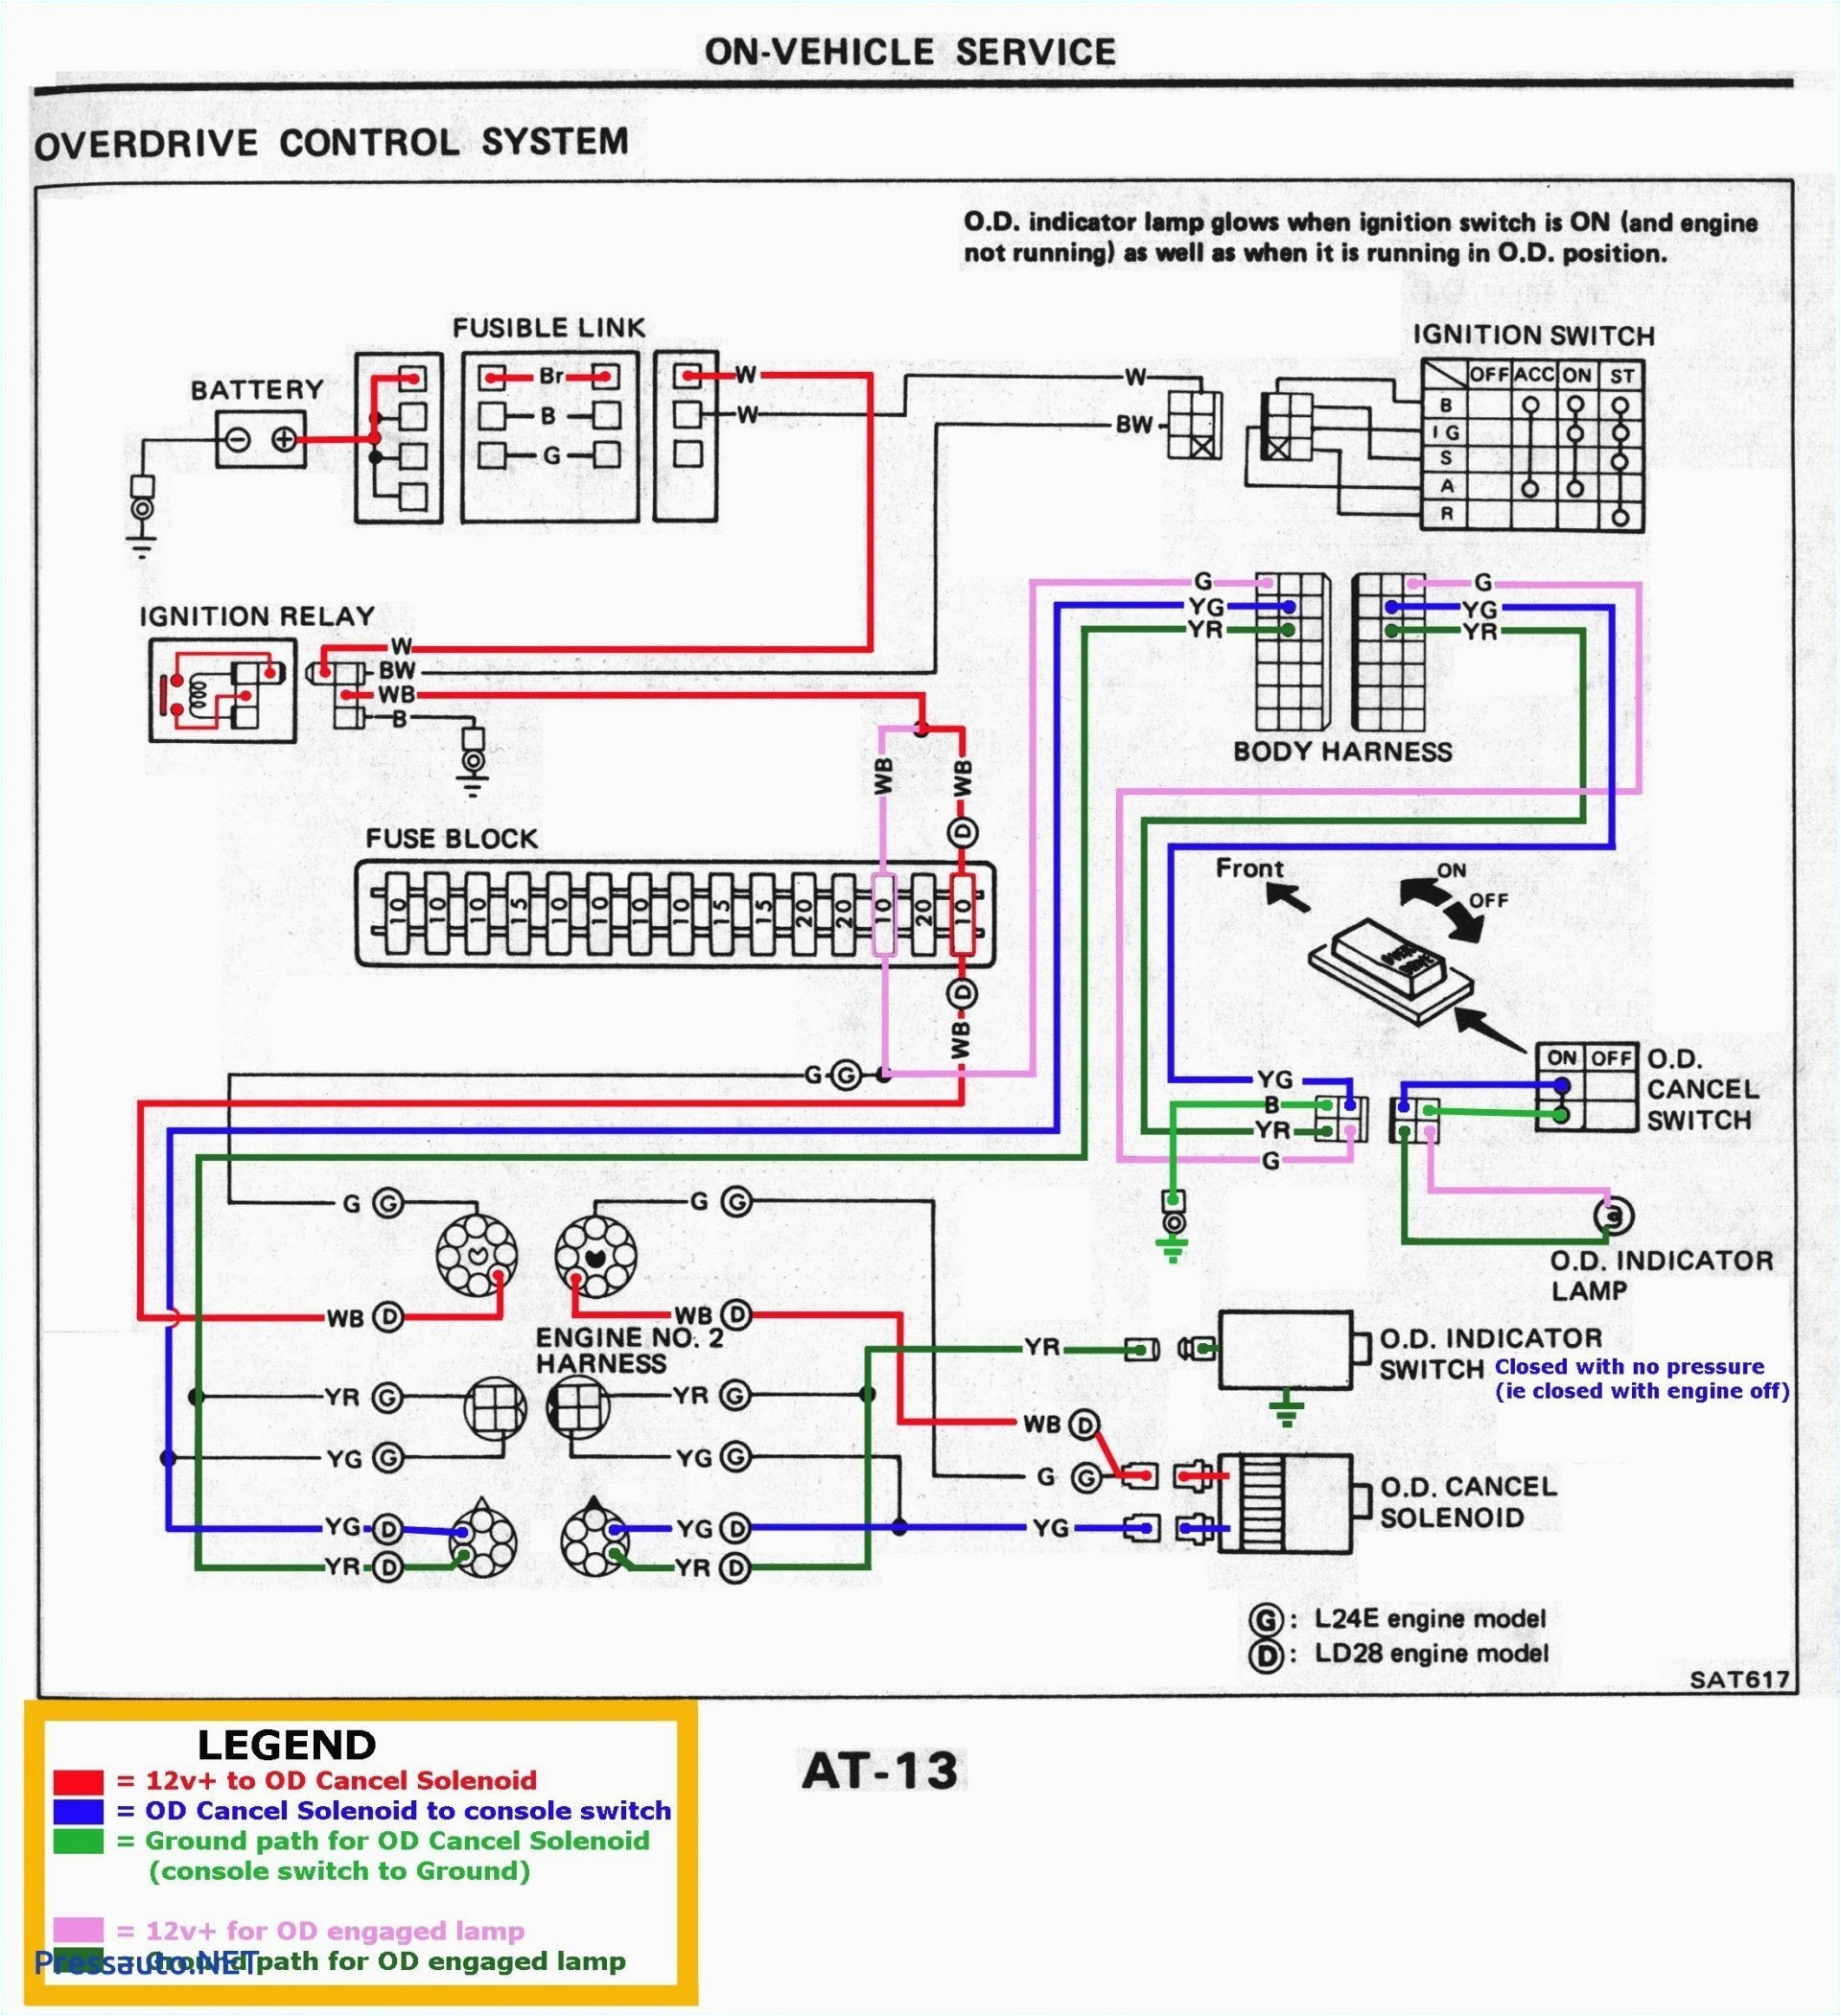 Electrical Wiring Diagram software Open source Audi Wiring Diagram Program Search Wiring Diagram